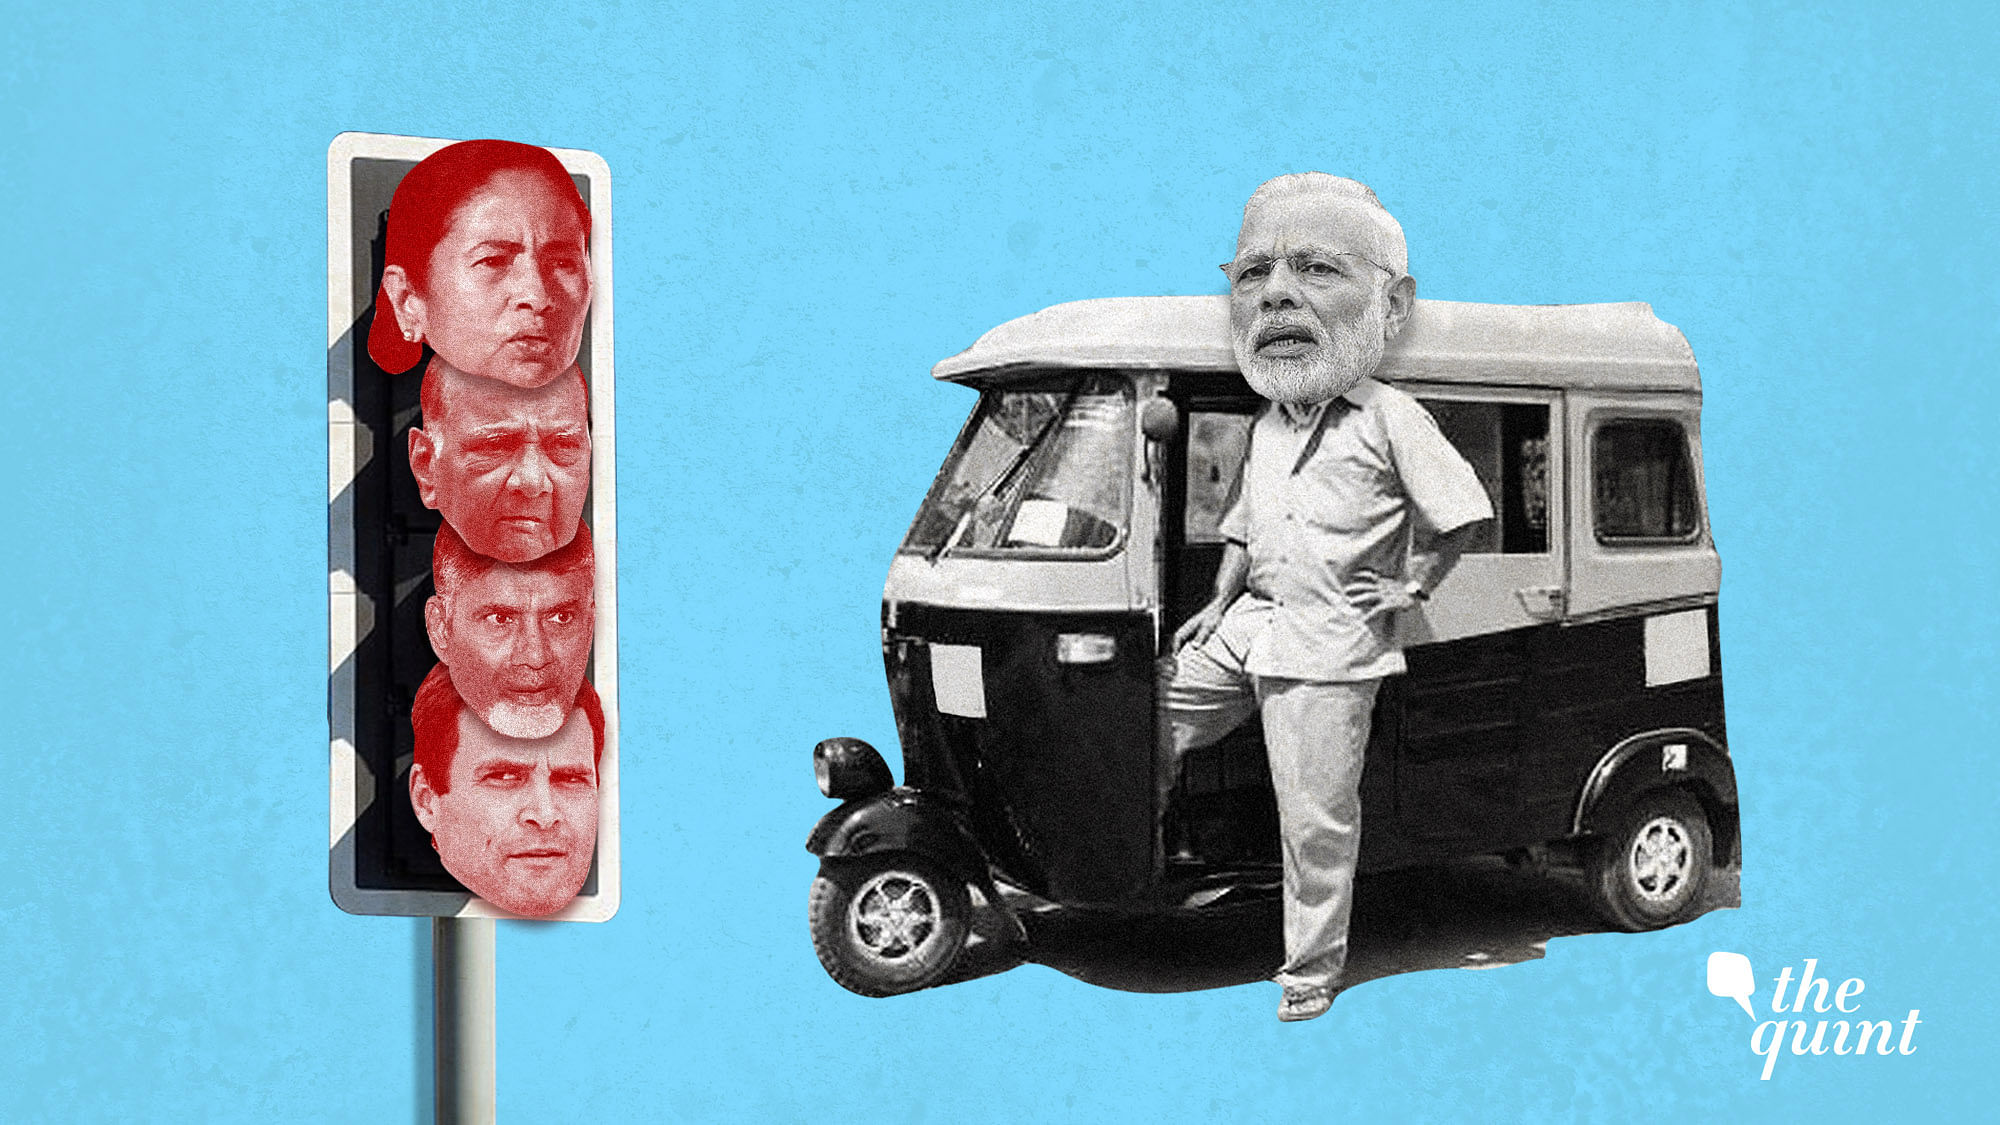 Can a United Opposition Defeat BJP’s Trojan Horse and Modi Wave?